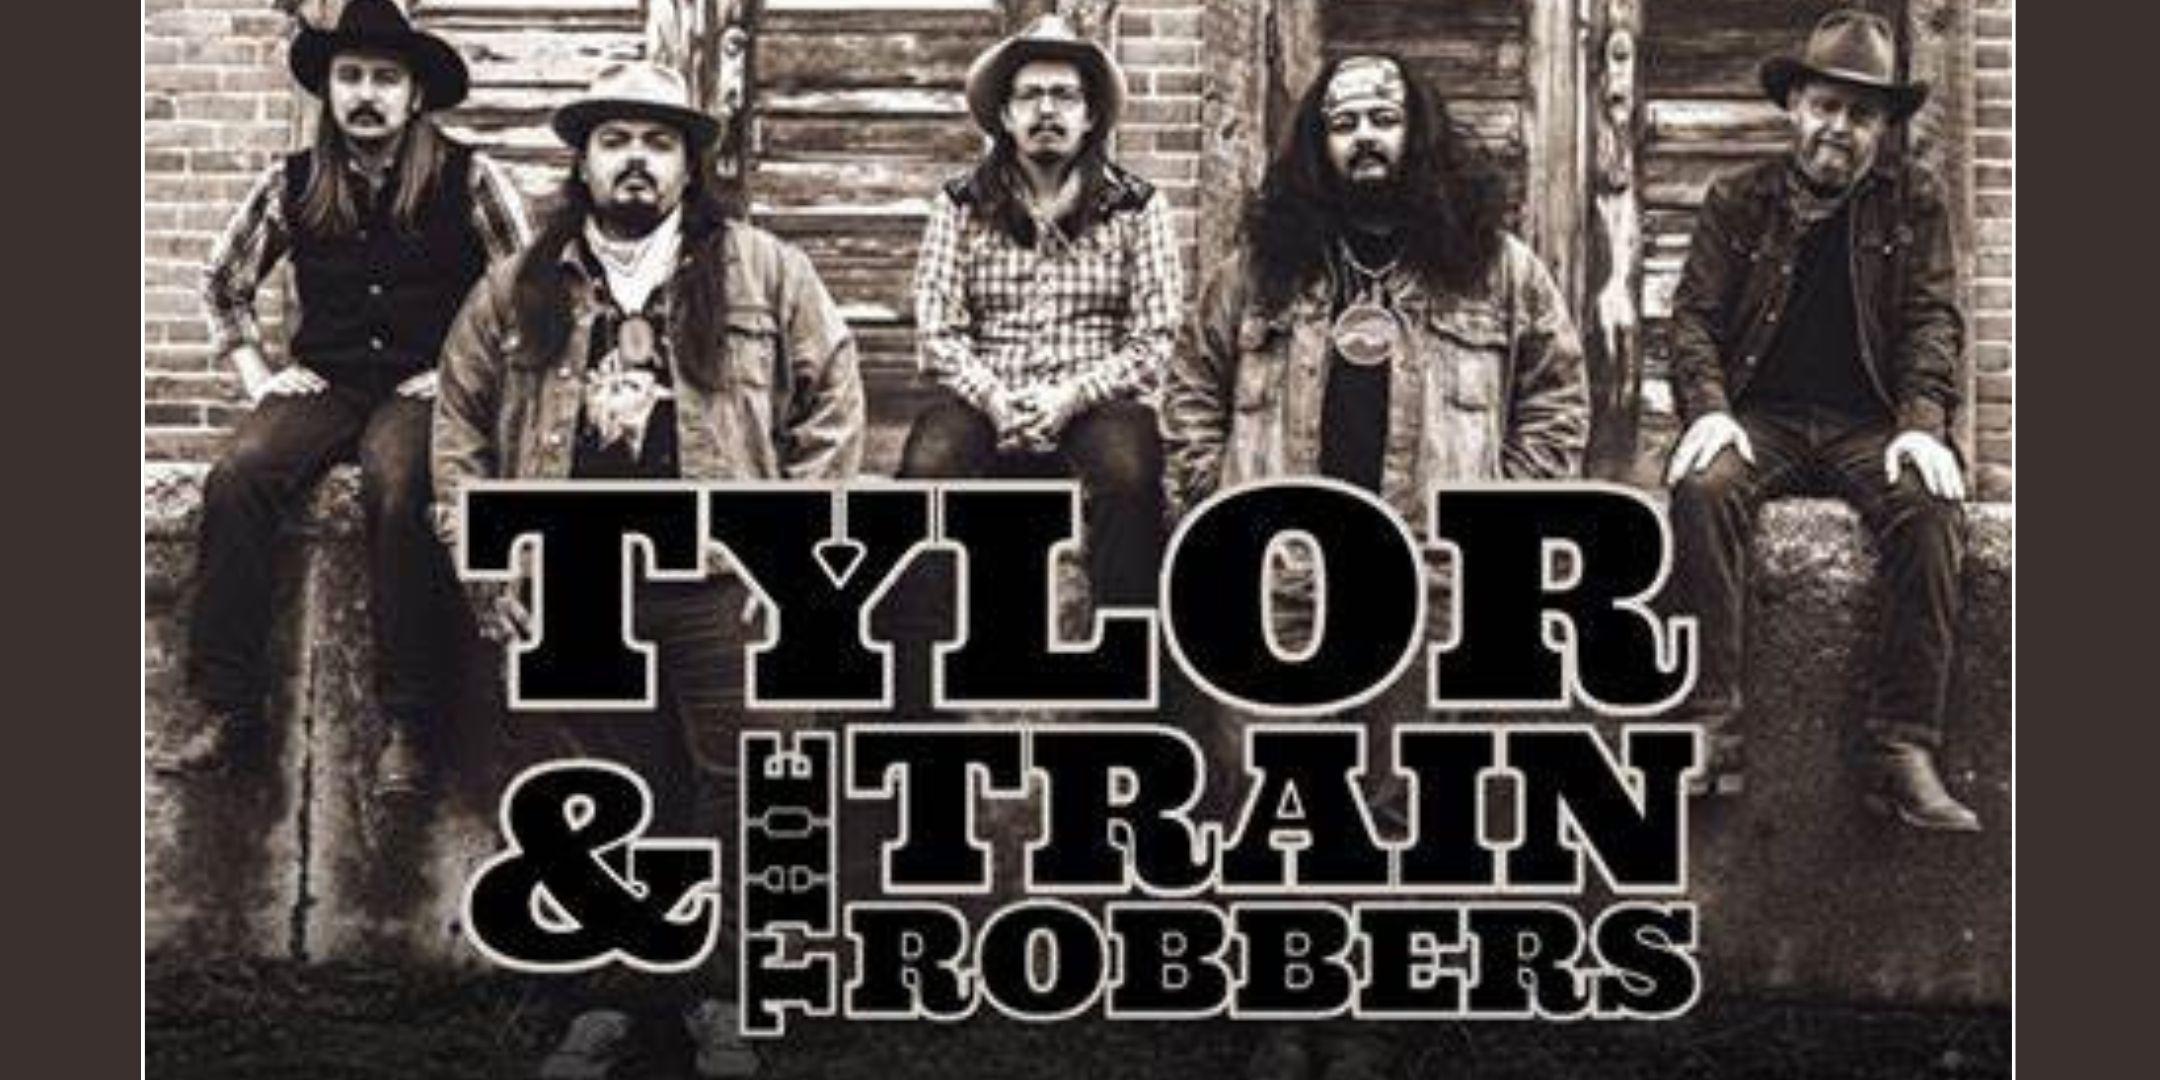 the train robbers